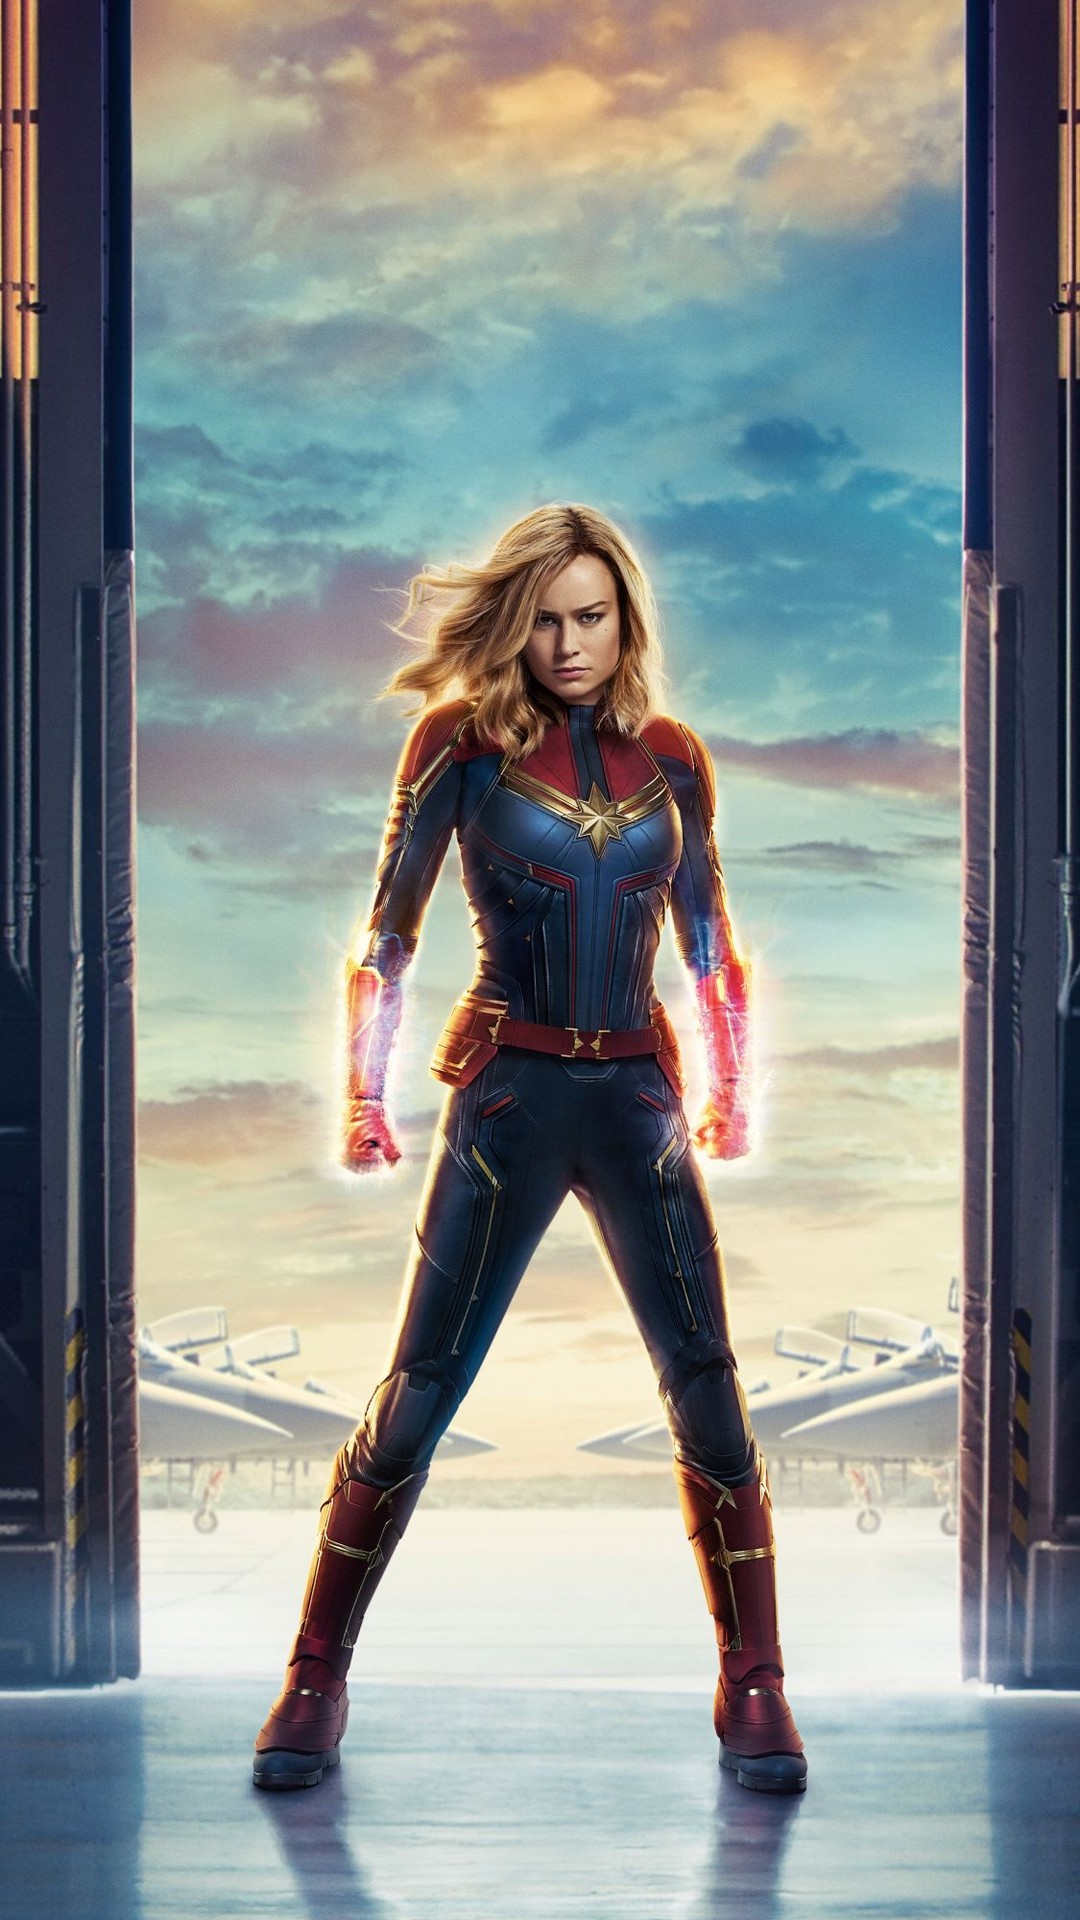 Wallpaper Captain Marvel Iphone With High-resolution - Iphone X Captain Marvel Backgrounds - HD Wallpaper 